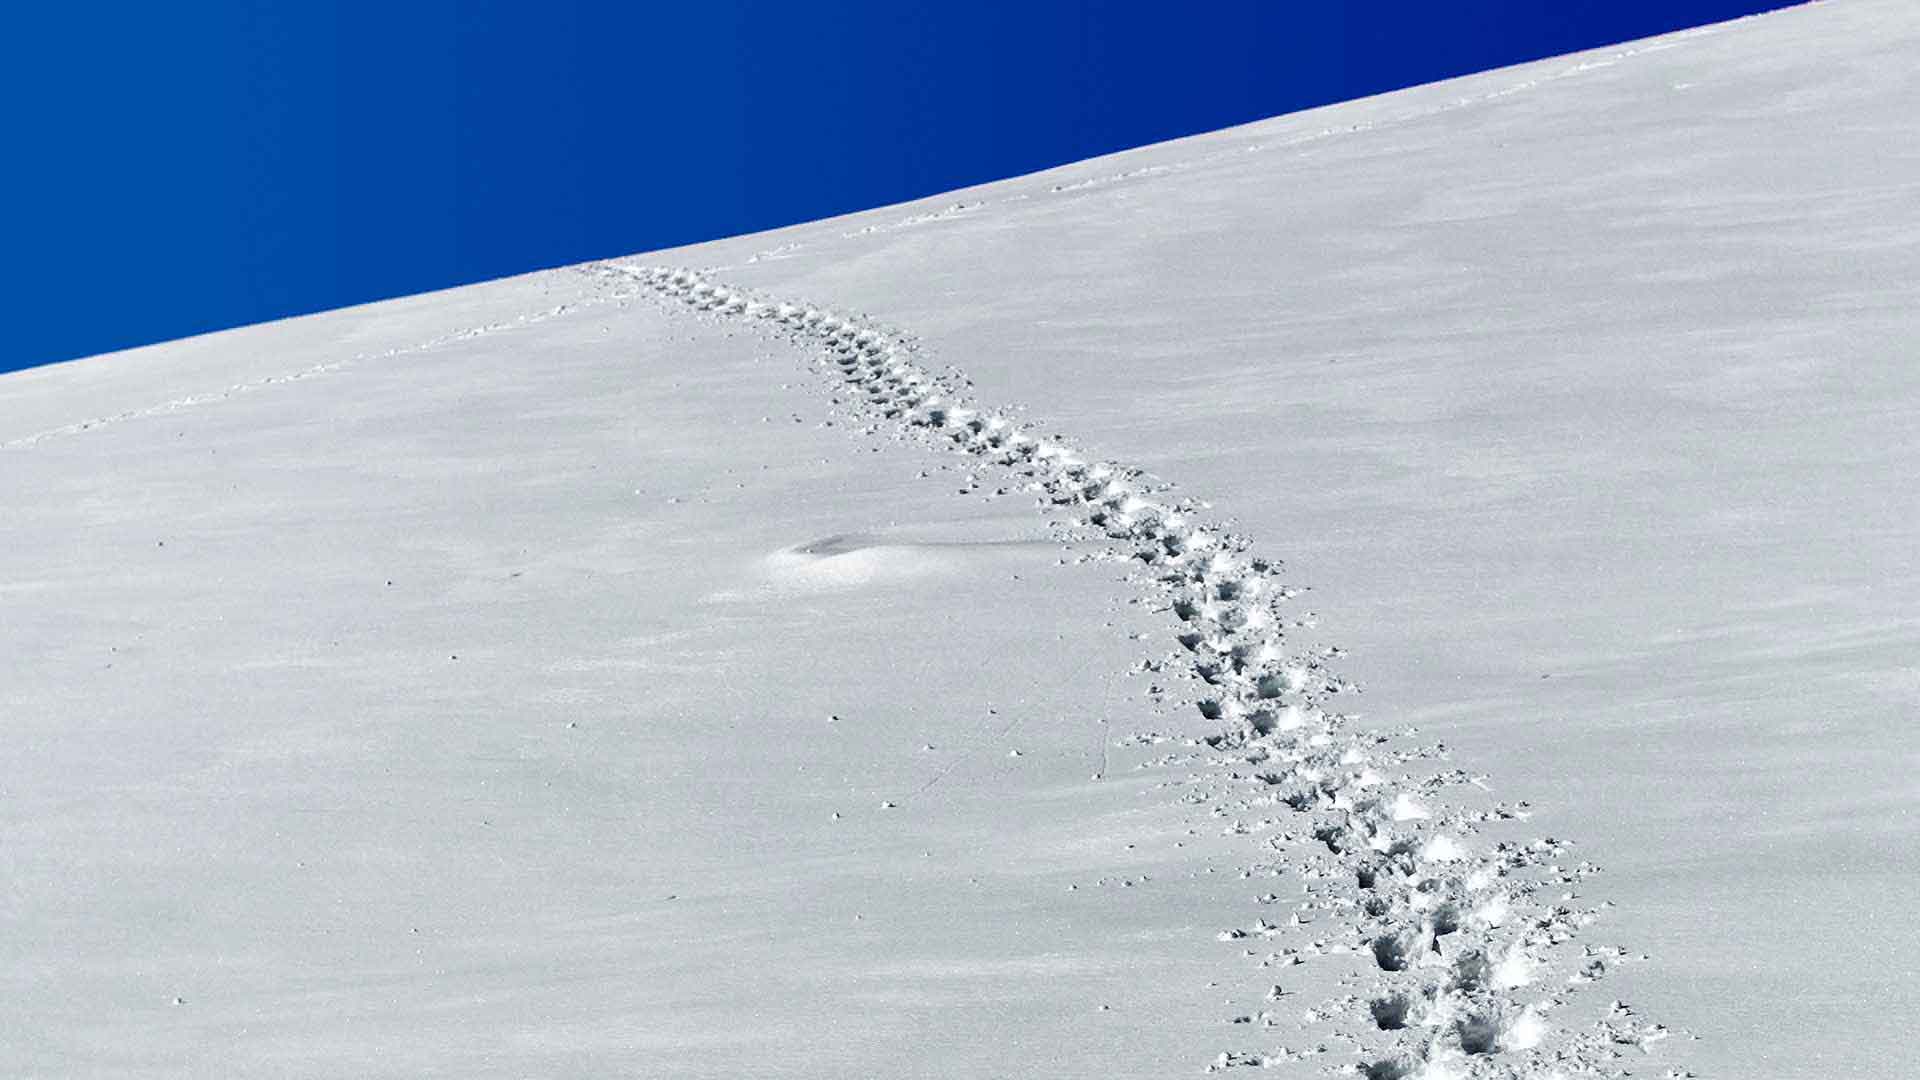 These tracks in the snow represent our digital carbon footprint